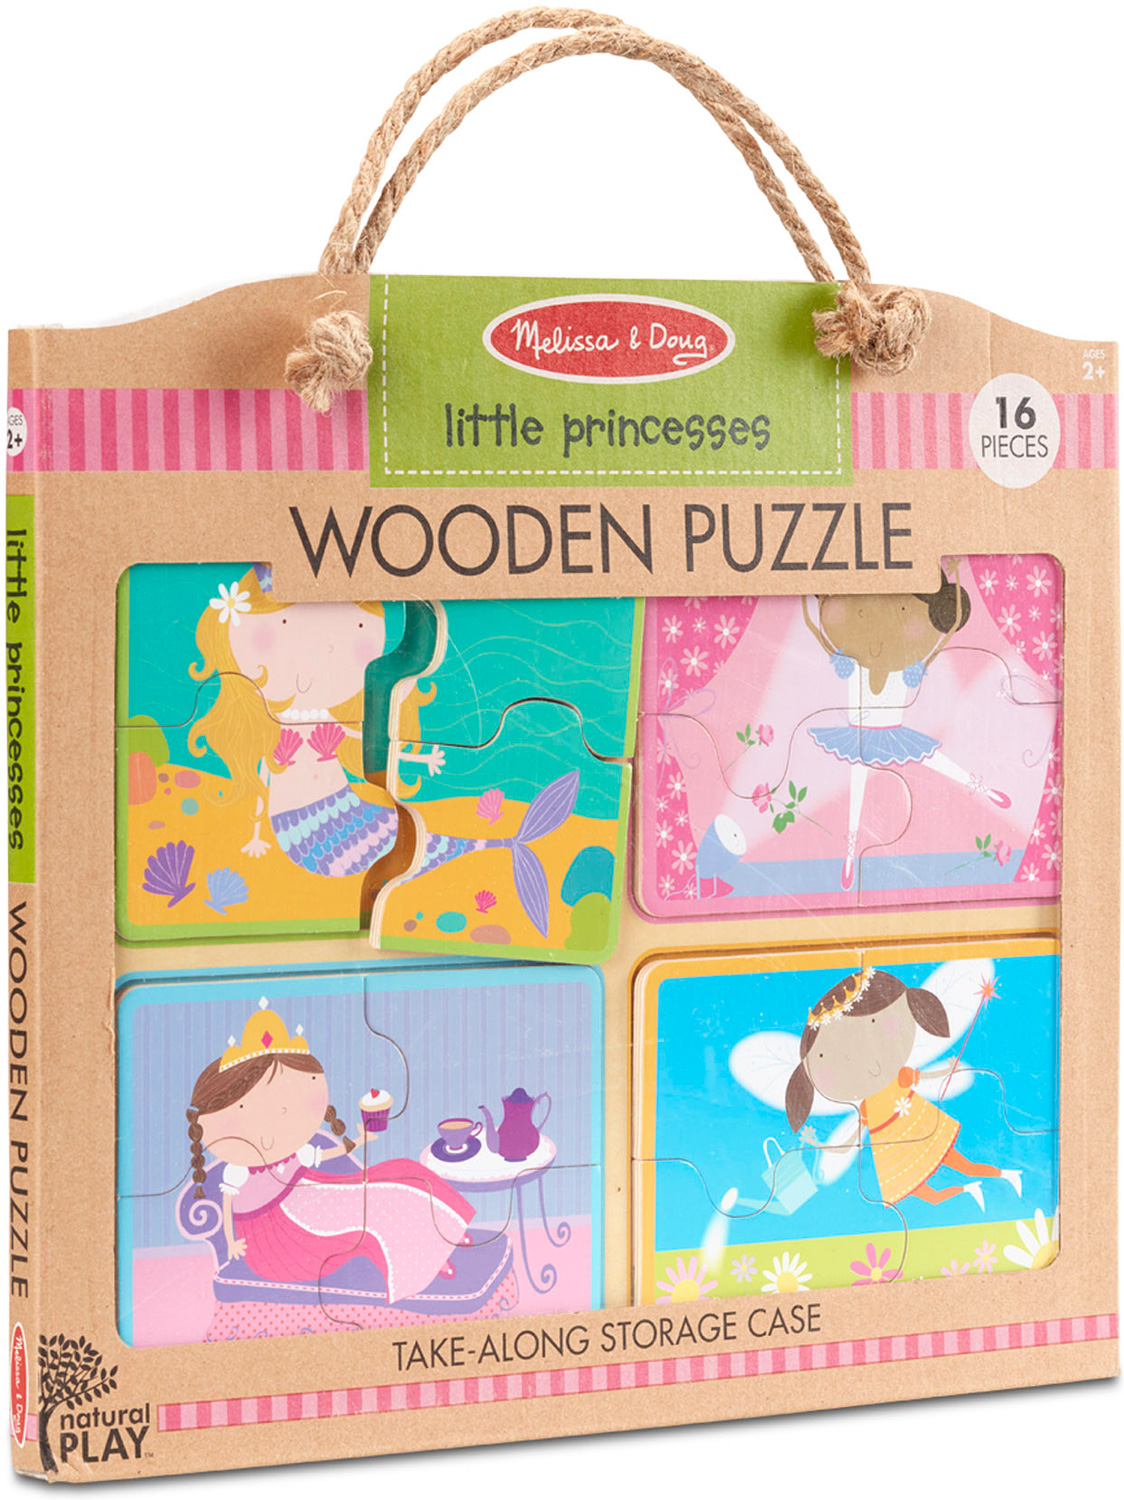 Natural Play Wooden Puzzle